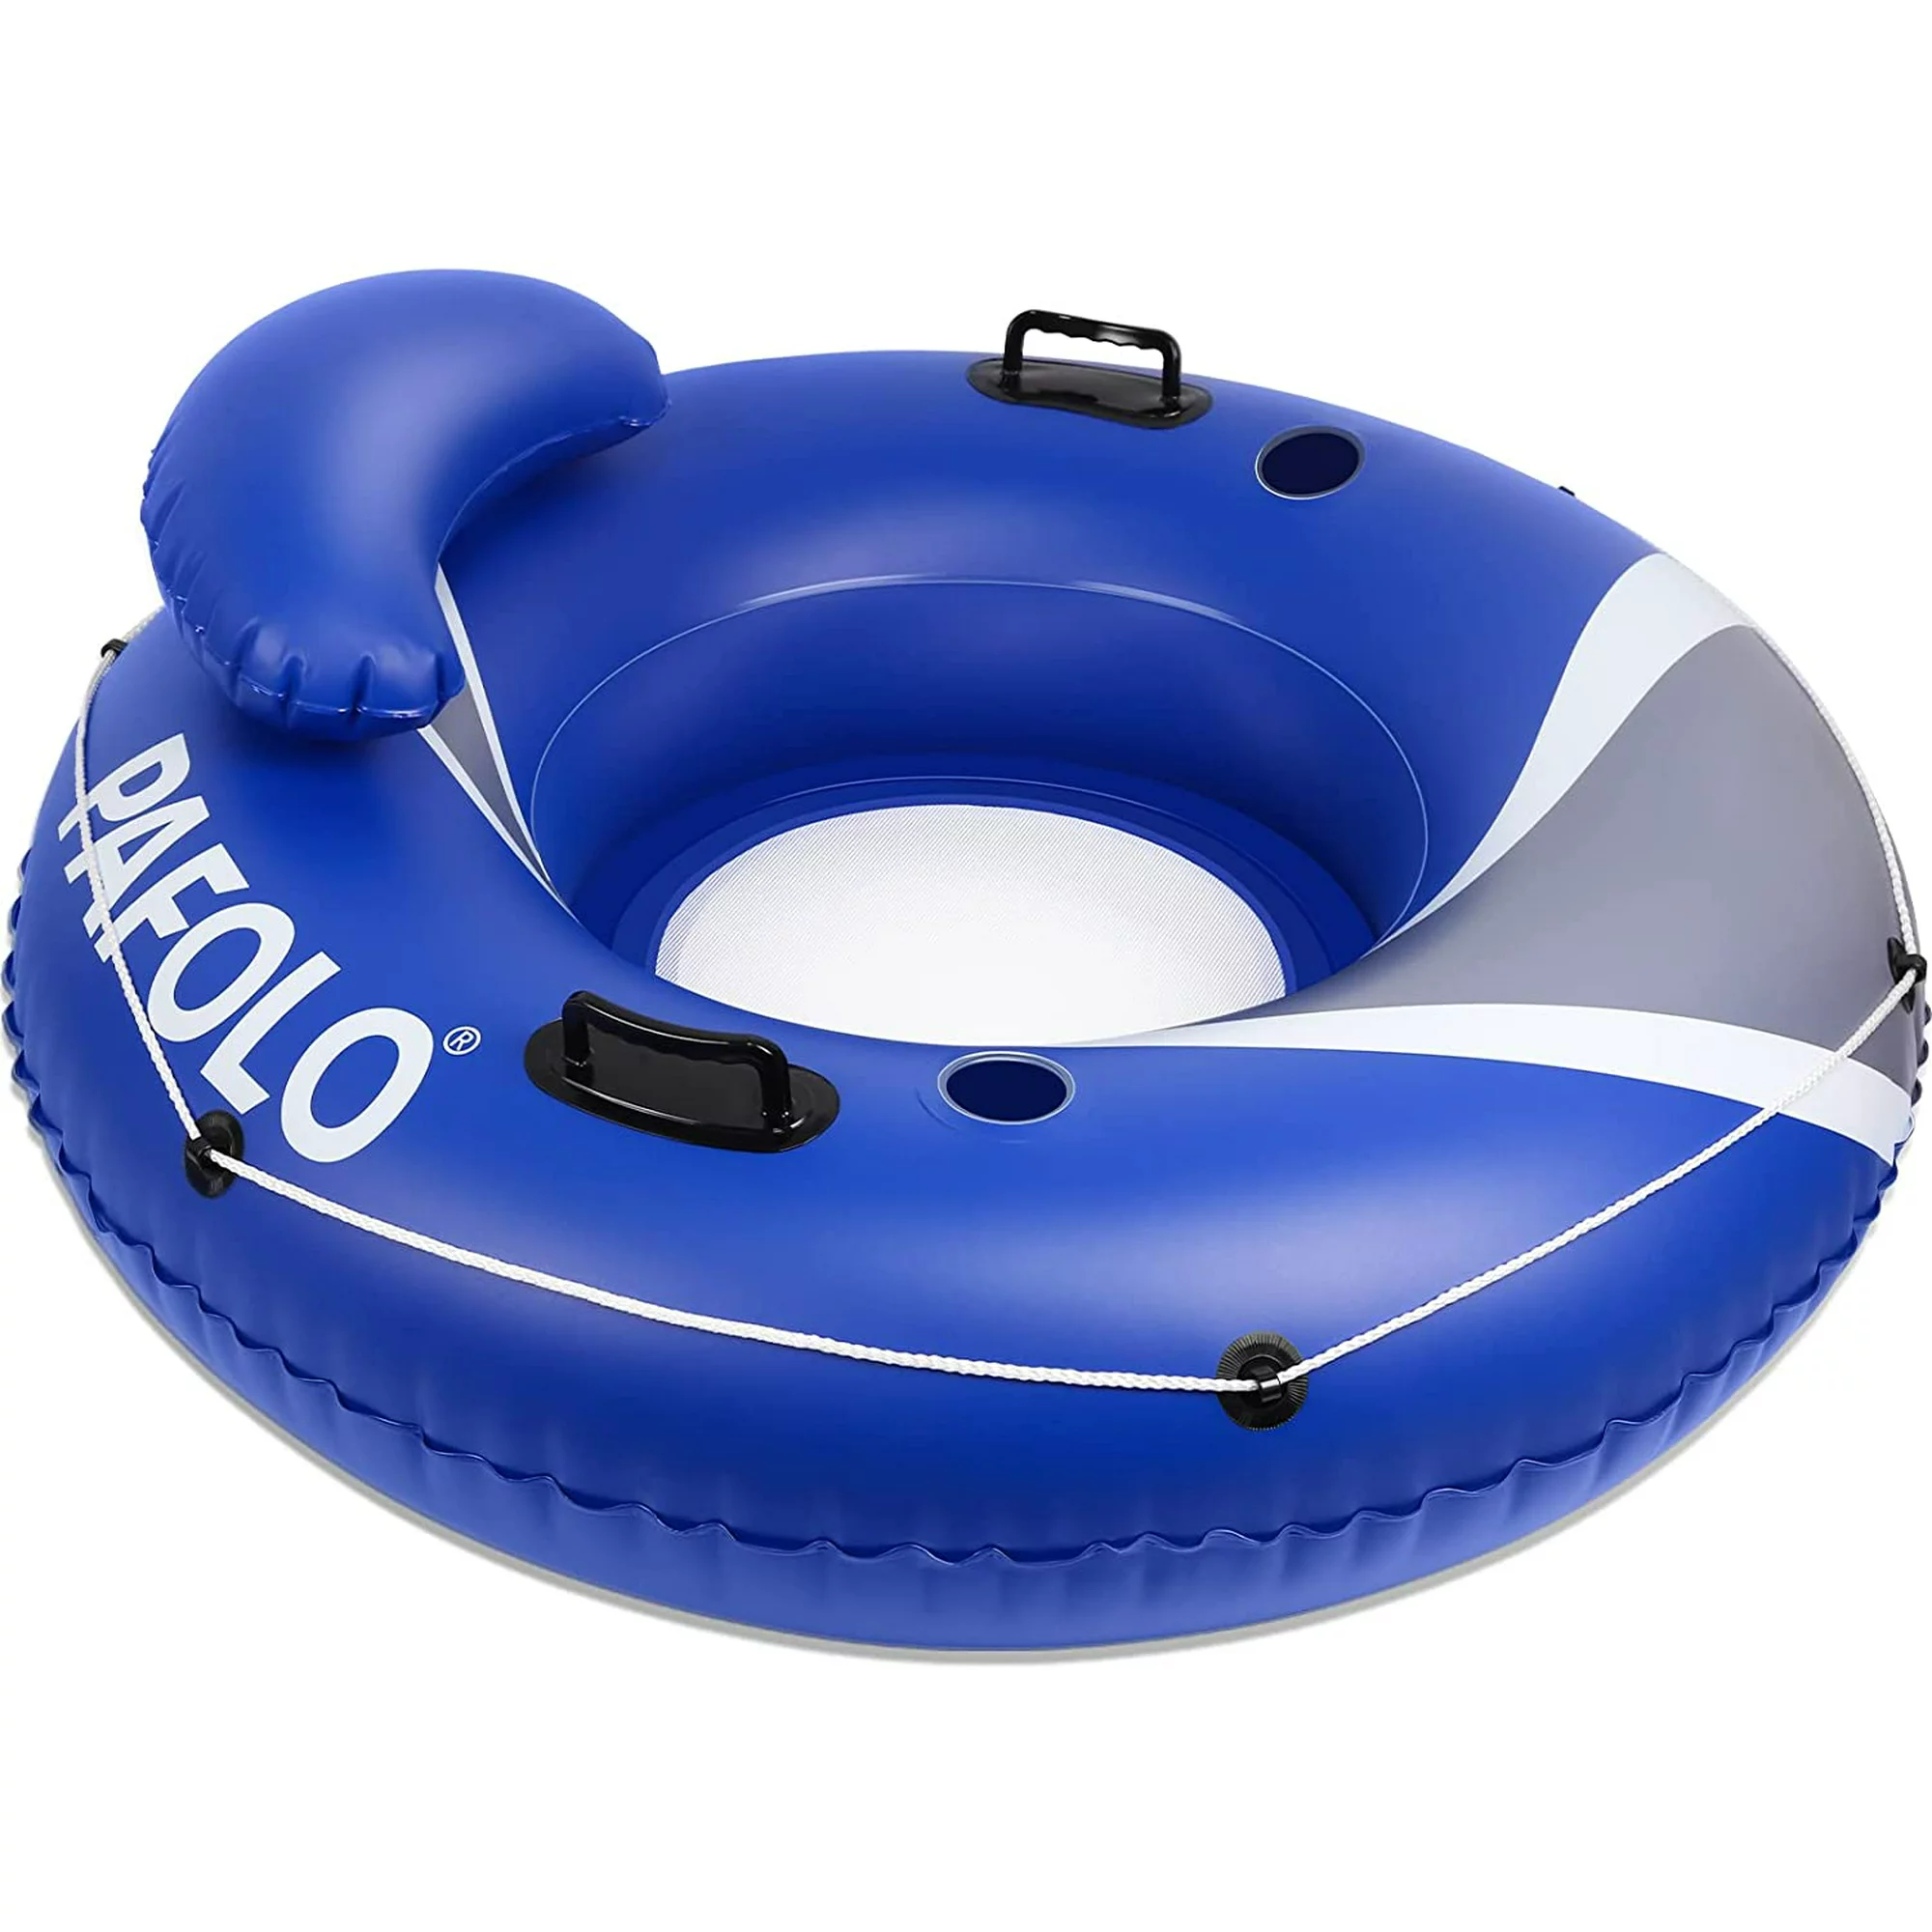 PAFOLO Pool Float Adult, River Tubes for Floating Heavy Duty, River Floats with Mesh Bottom, 2 Cup Holders, 2 Heavy-Duty Handles, Headrest, 53" Inflatable Float Tube for Beach Lake Rafting